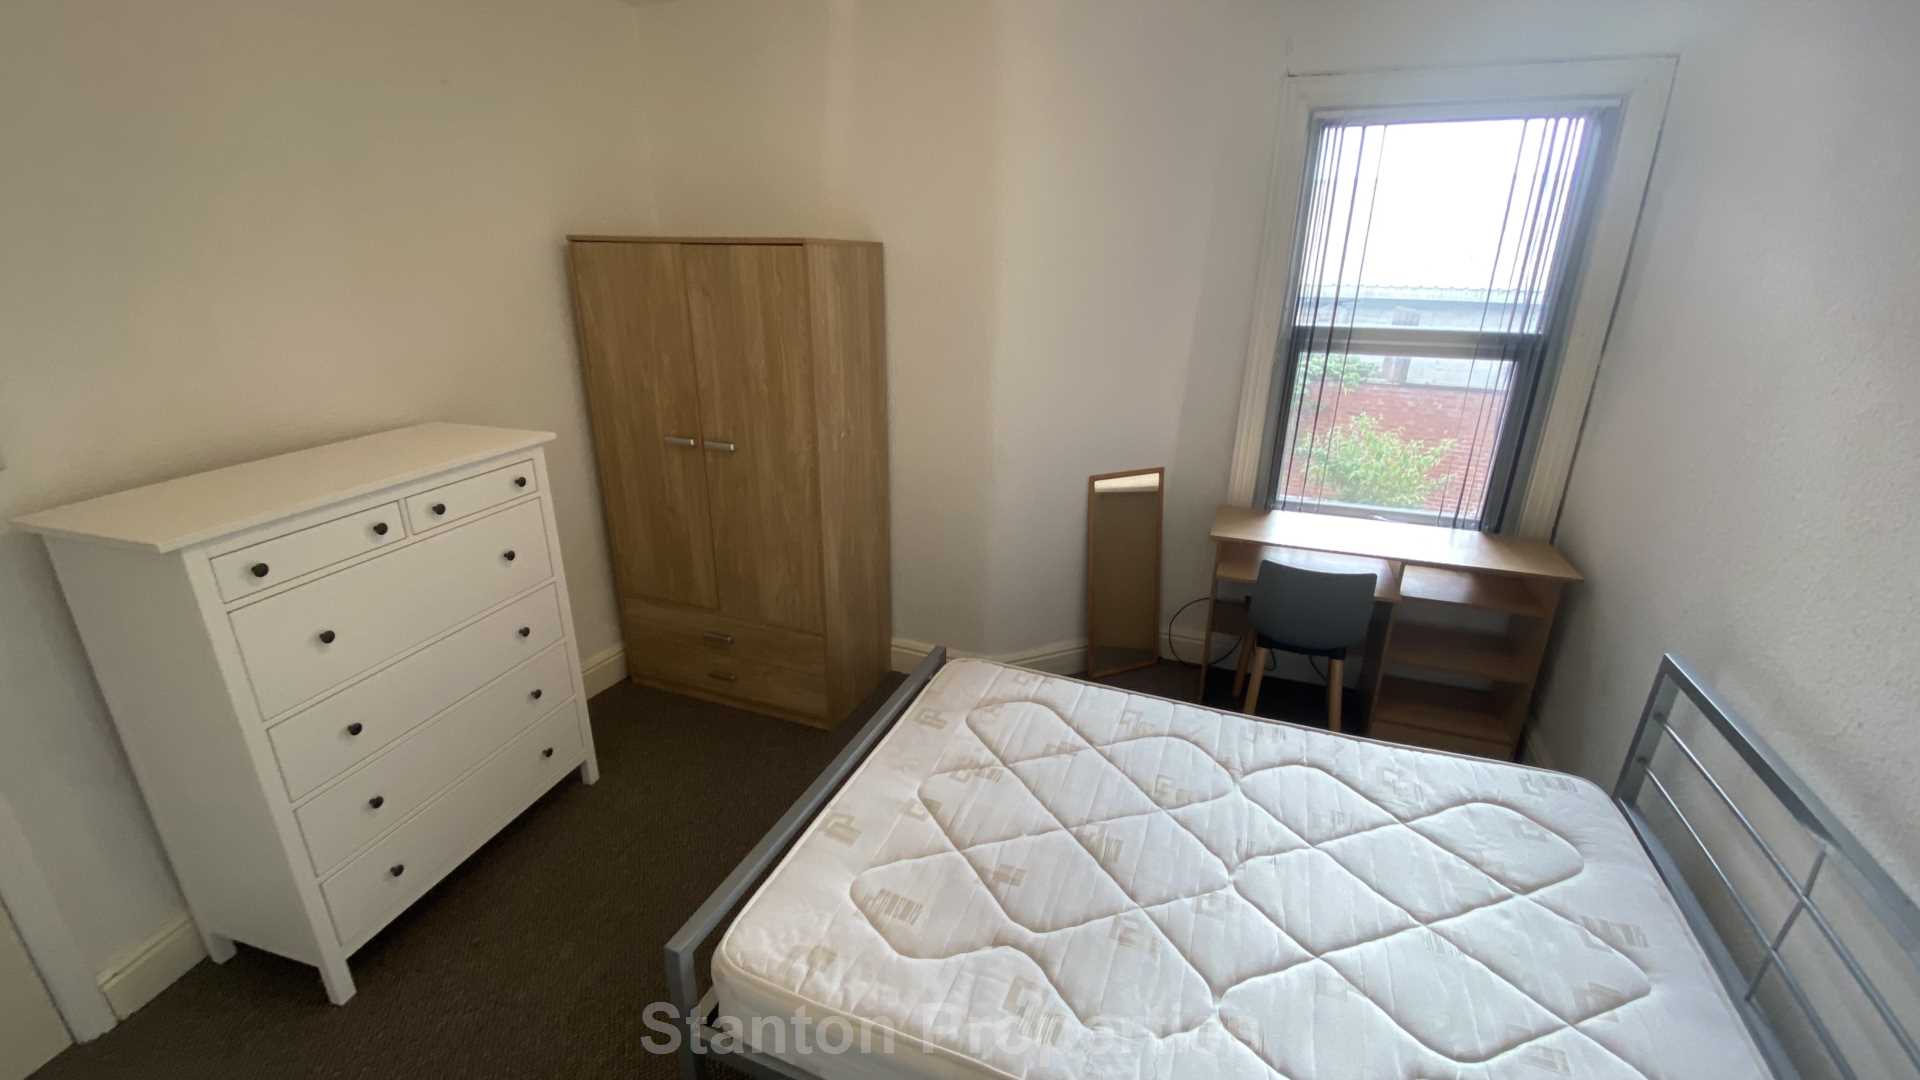 £130 pppw, Moseley Road, Fallowfield, M14 6NR, Image 19